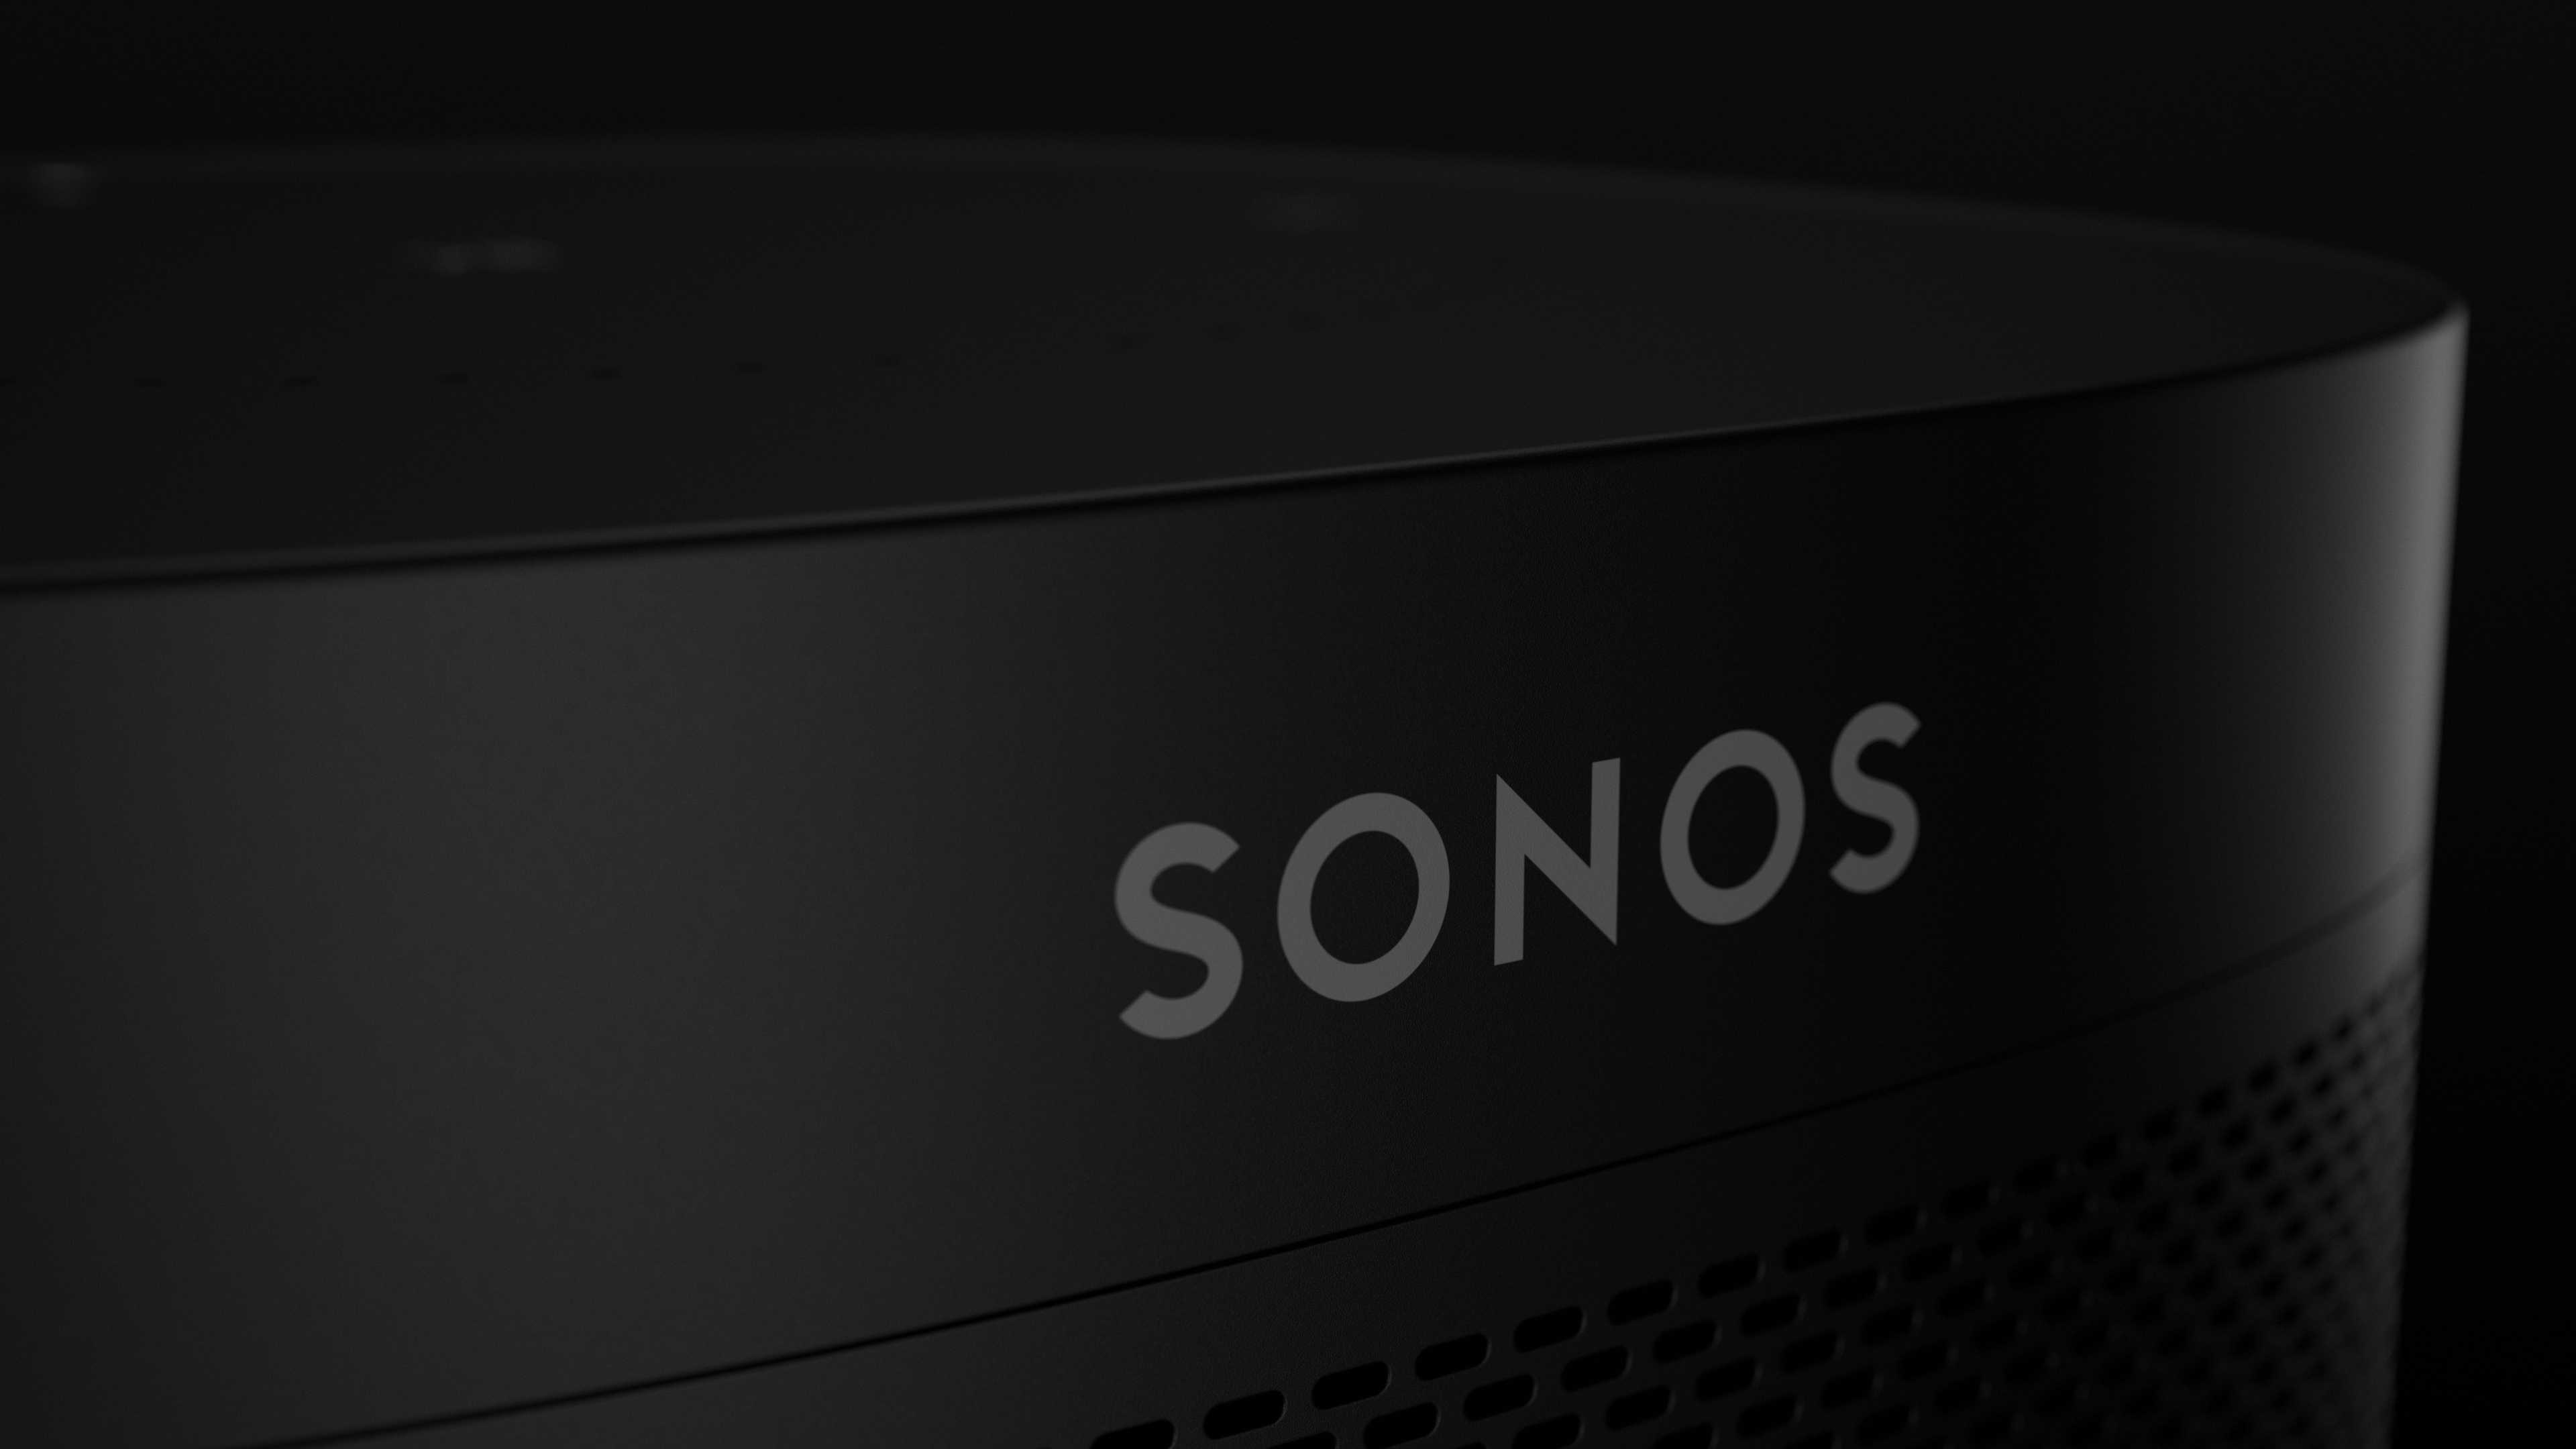 sonos-updates-its-privacy-policy-and-seemingly-hints-they